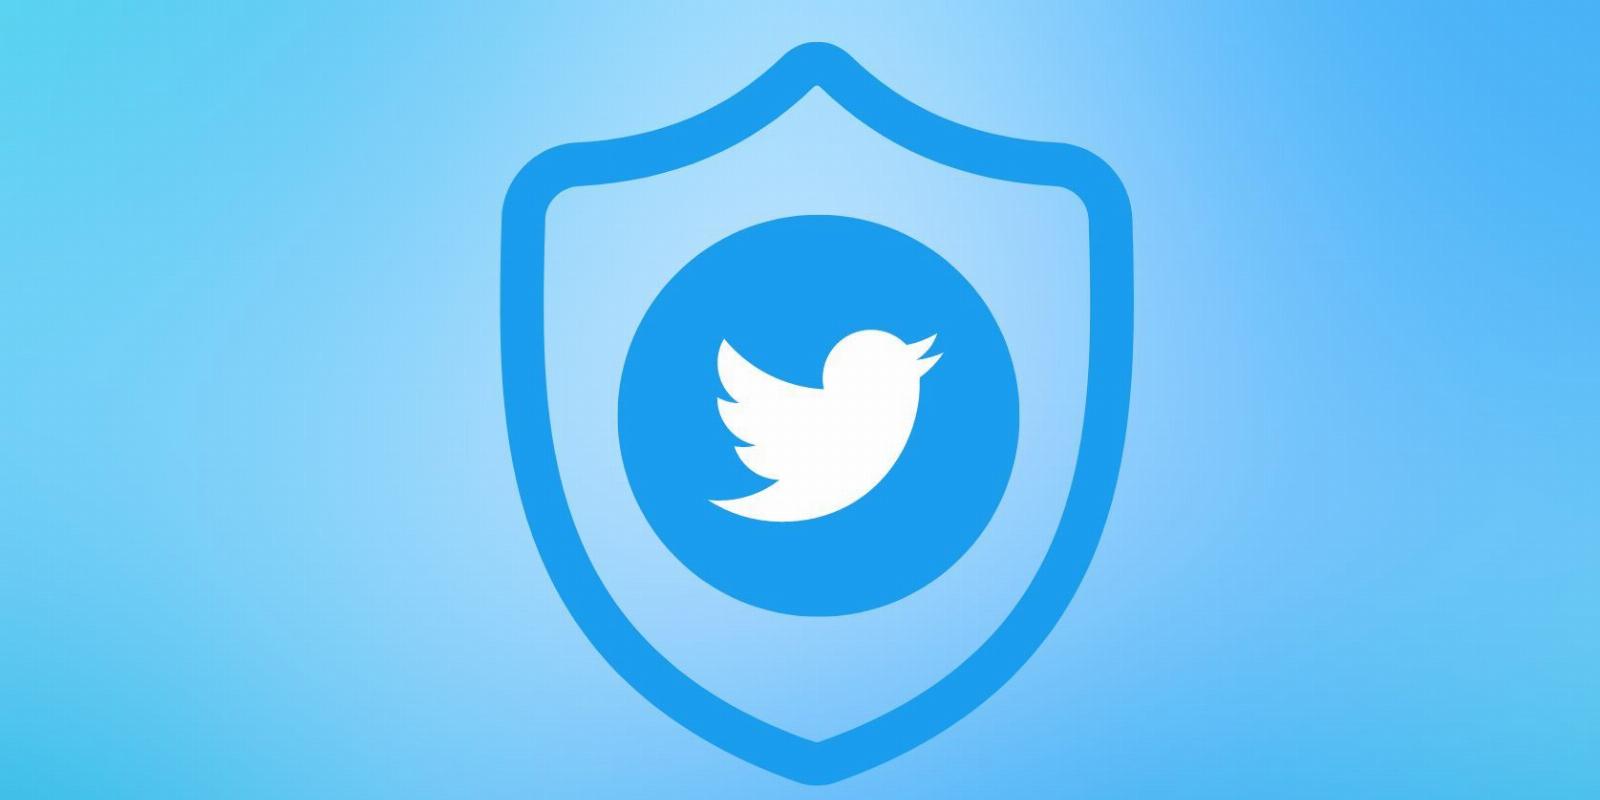 Forget SMS: 3 Other Ways to Secure Your Twitter Account With 2FA